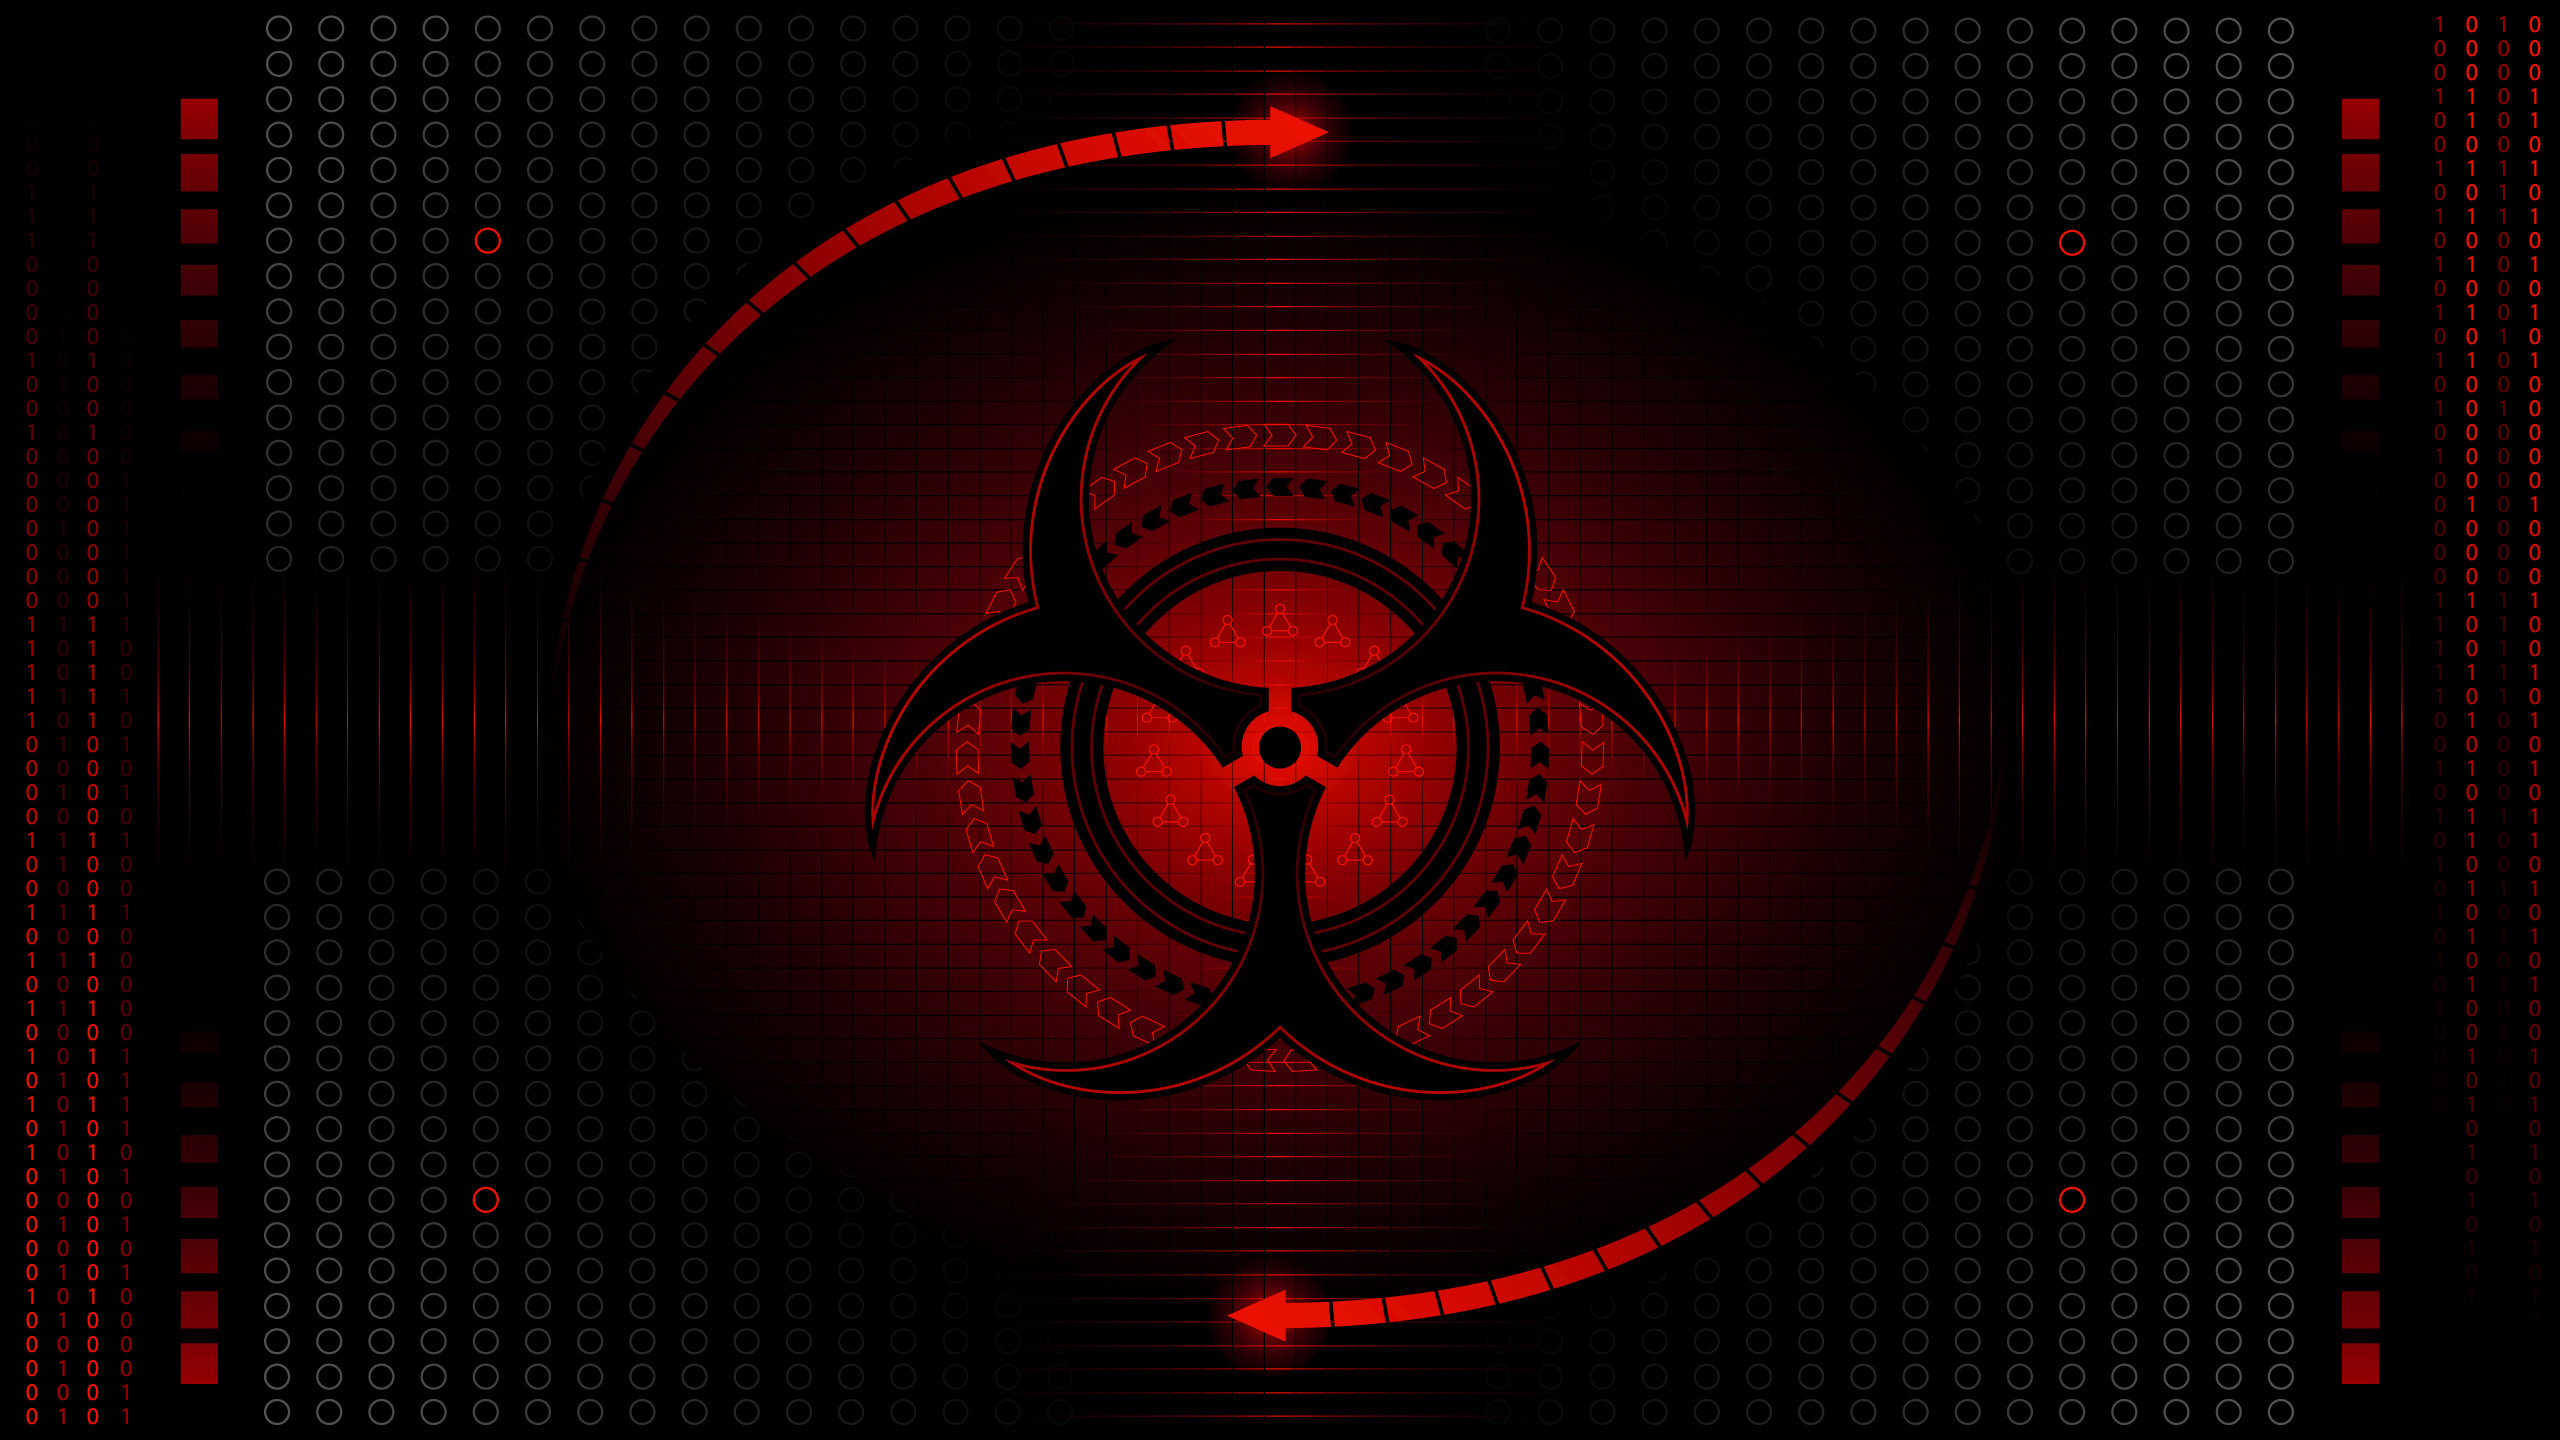 2560x1440 Toxic Wallpaper - Wallpapers Browse Toxic Wallpapers - Wallpaper Cave  Radioactive Symbol Wallpapers - Wallpaper Cave ...